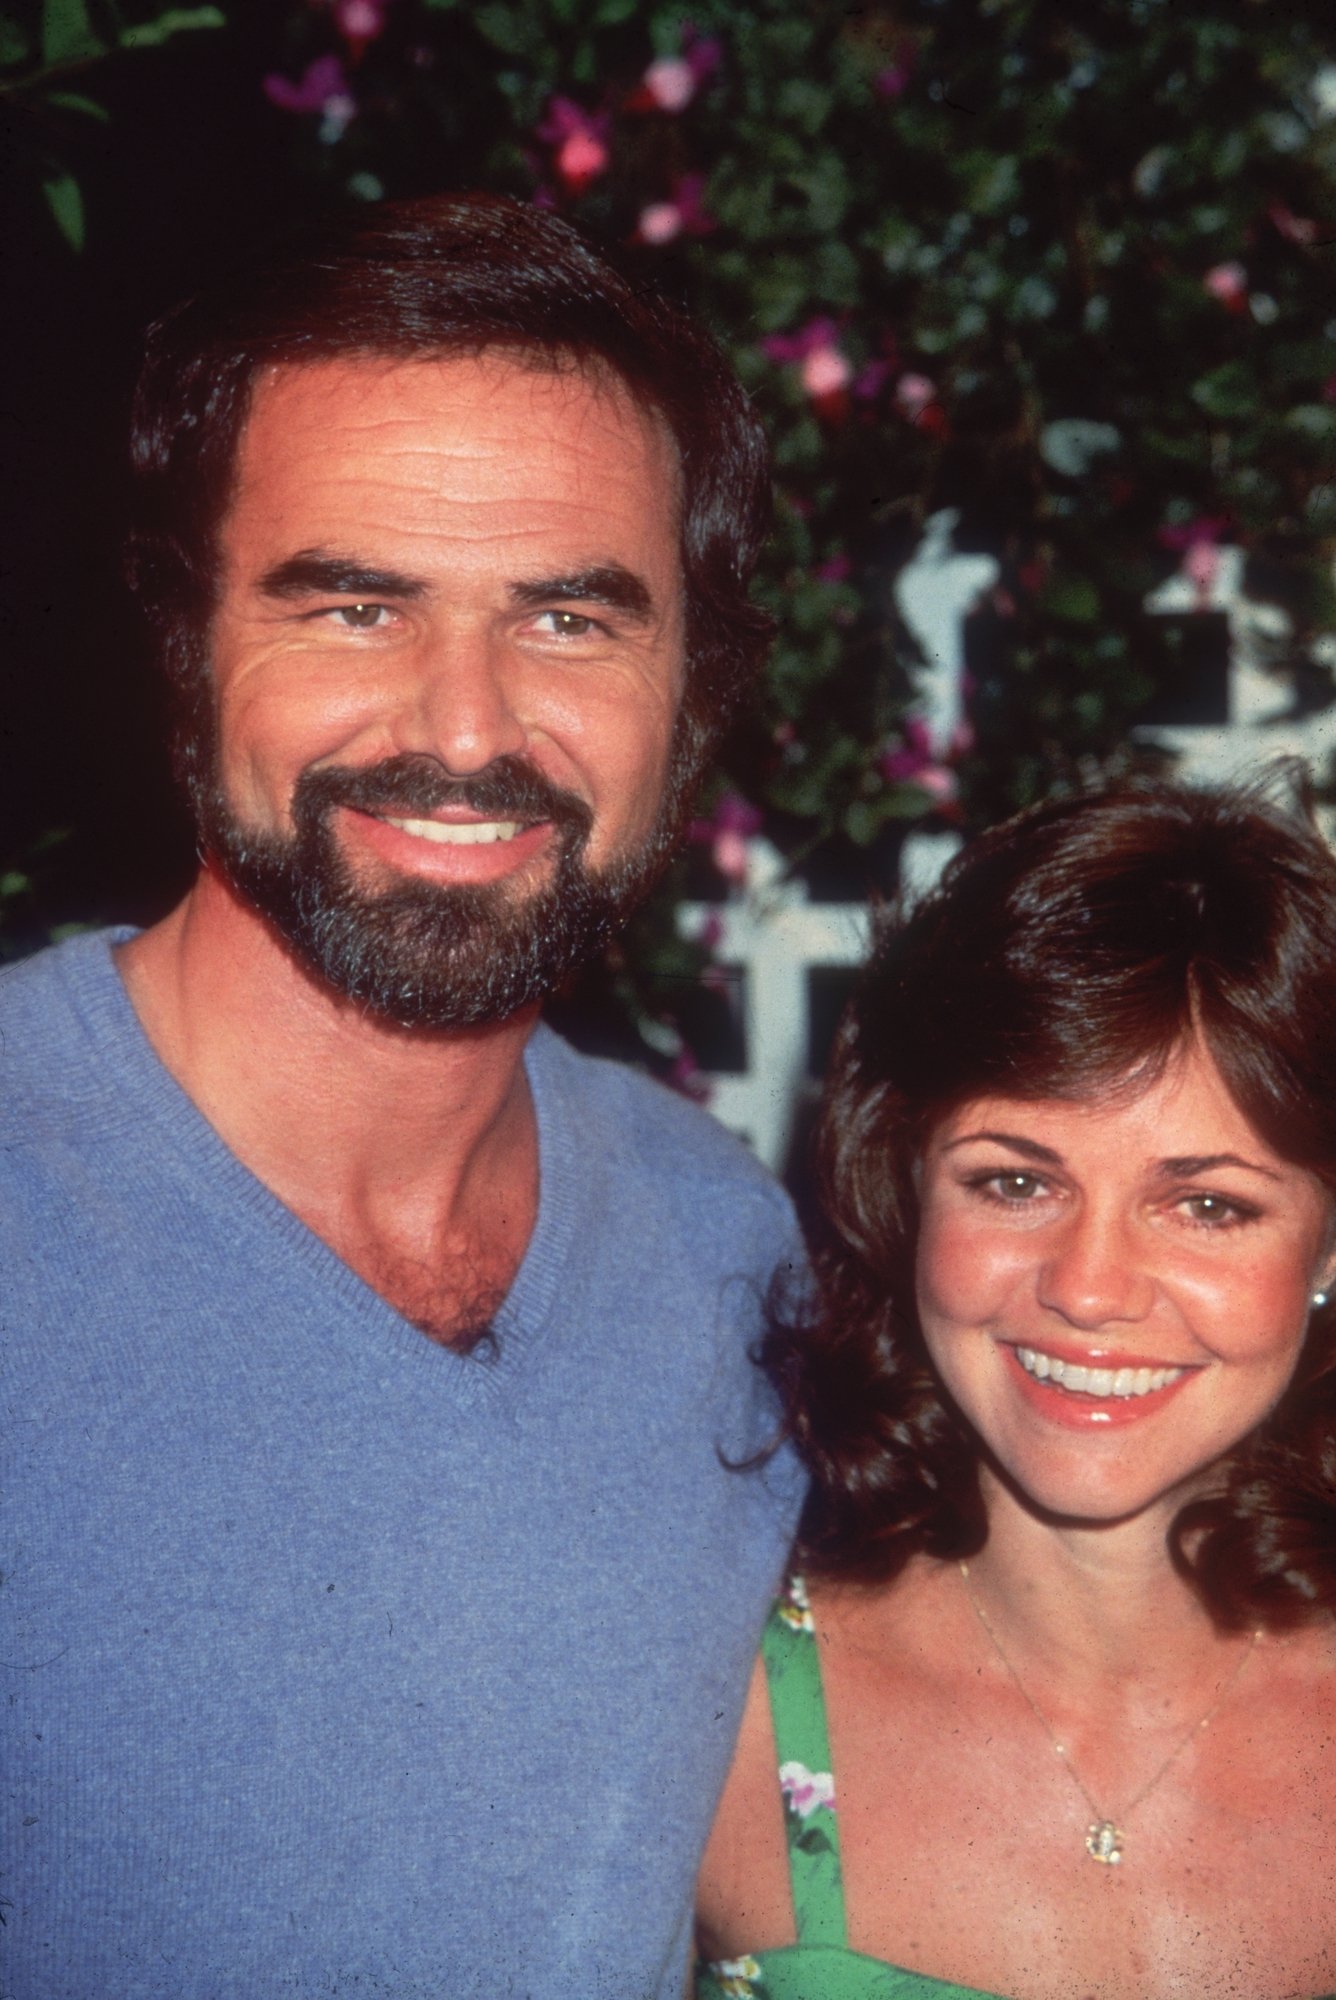 Burt Reynolds and Sally Field posing together at an outdoor event in 1977